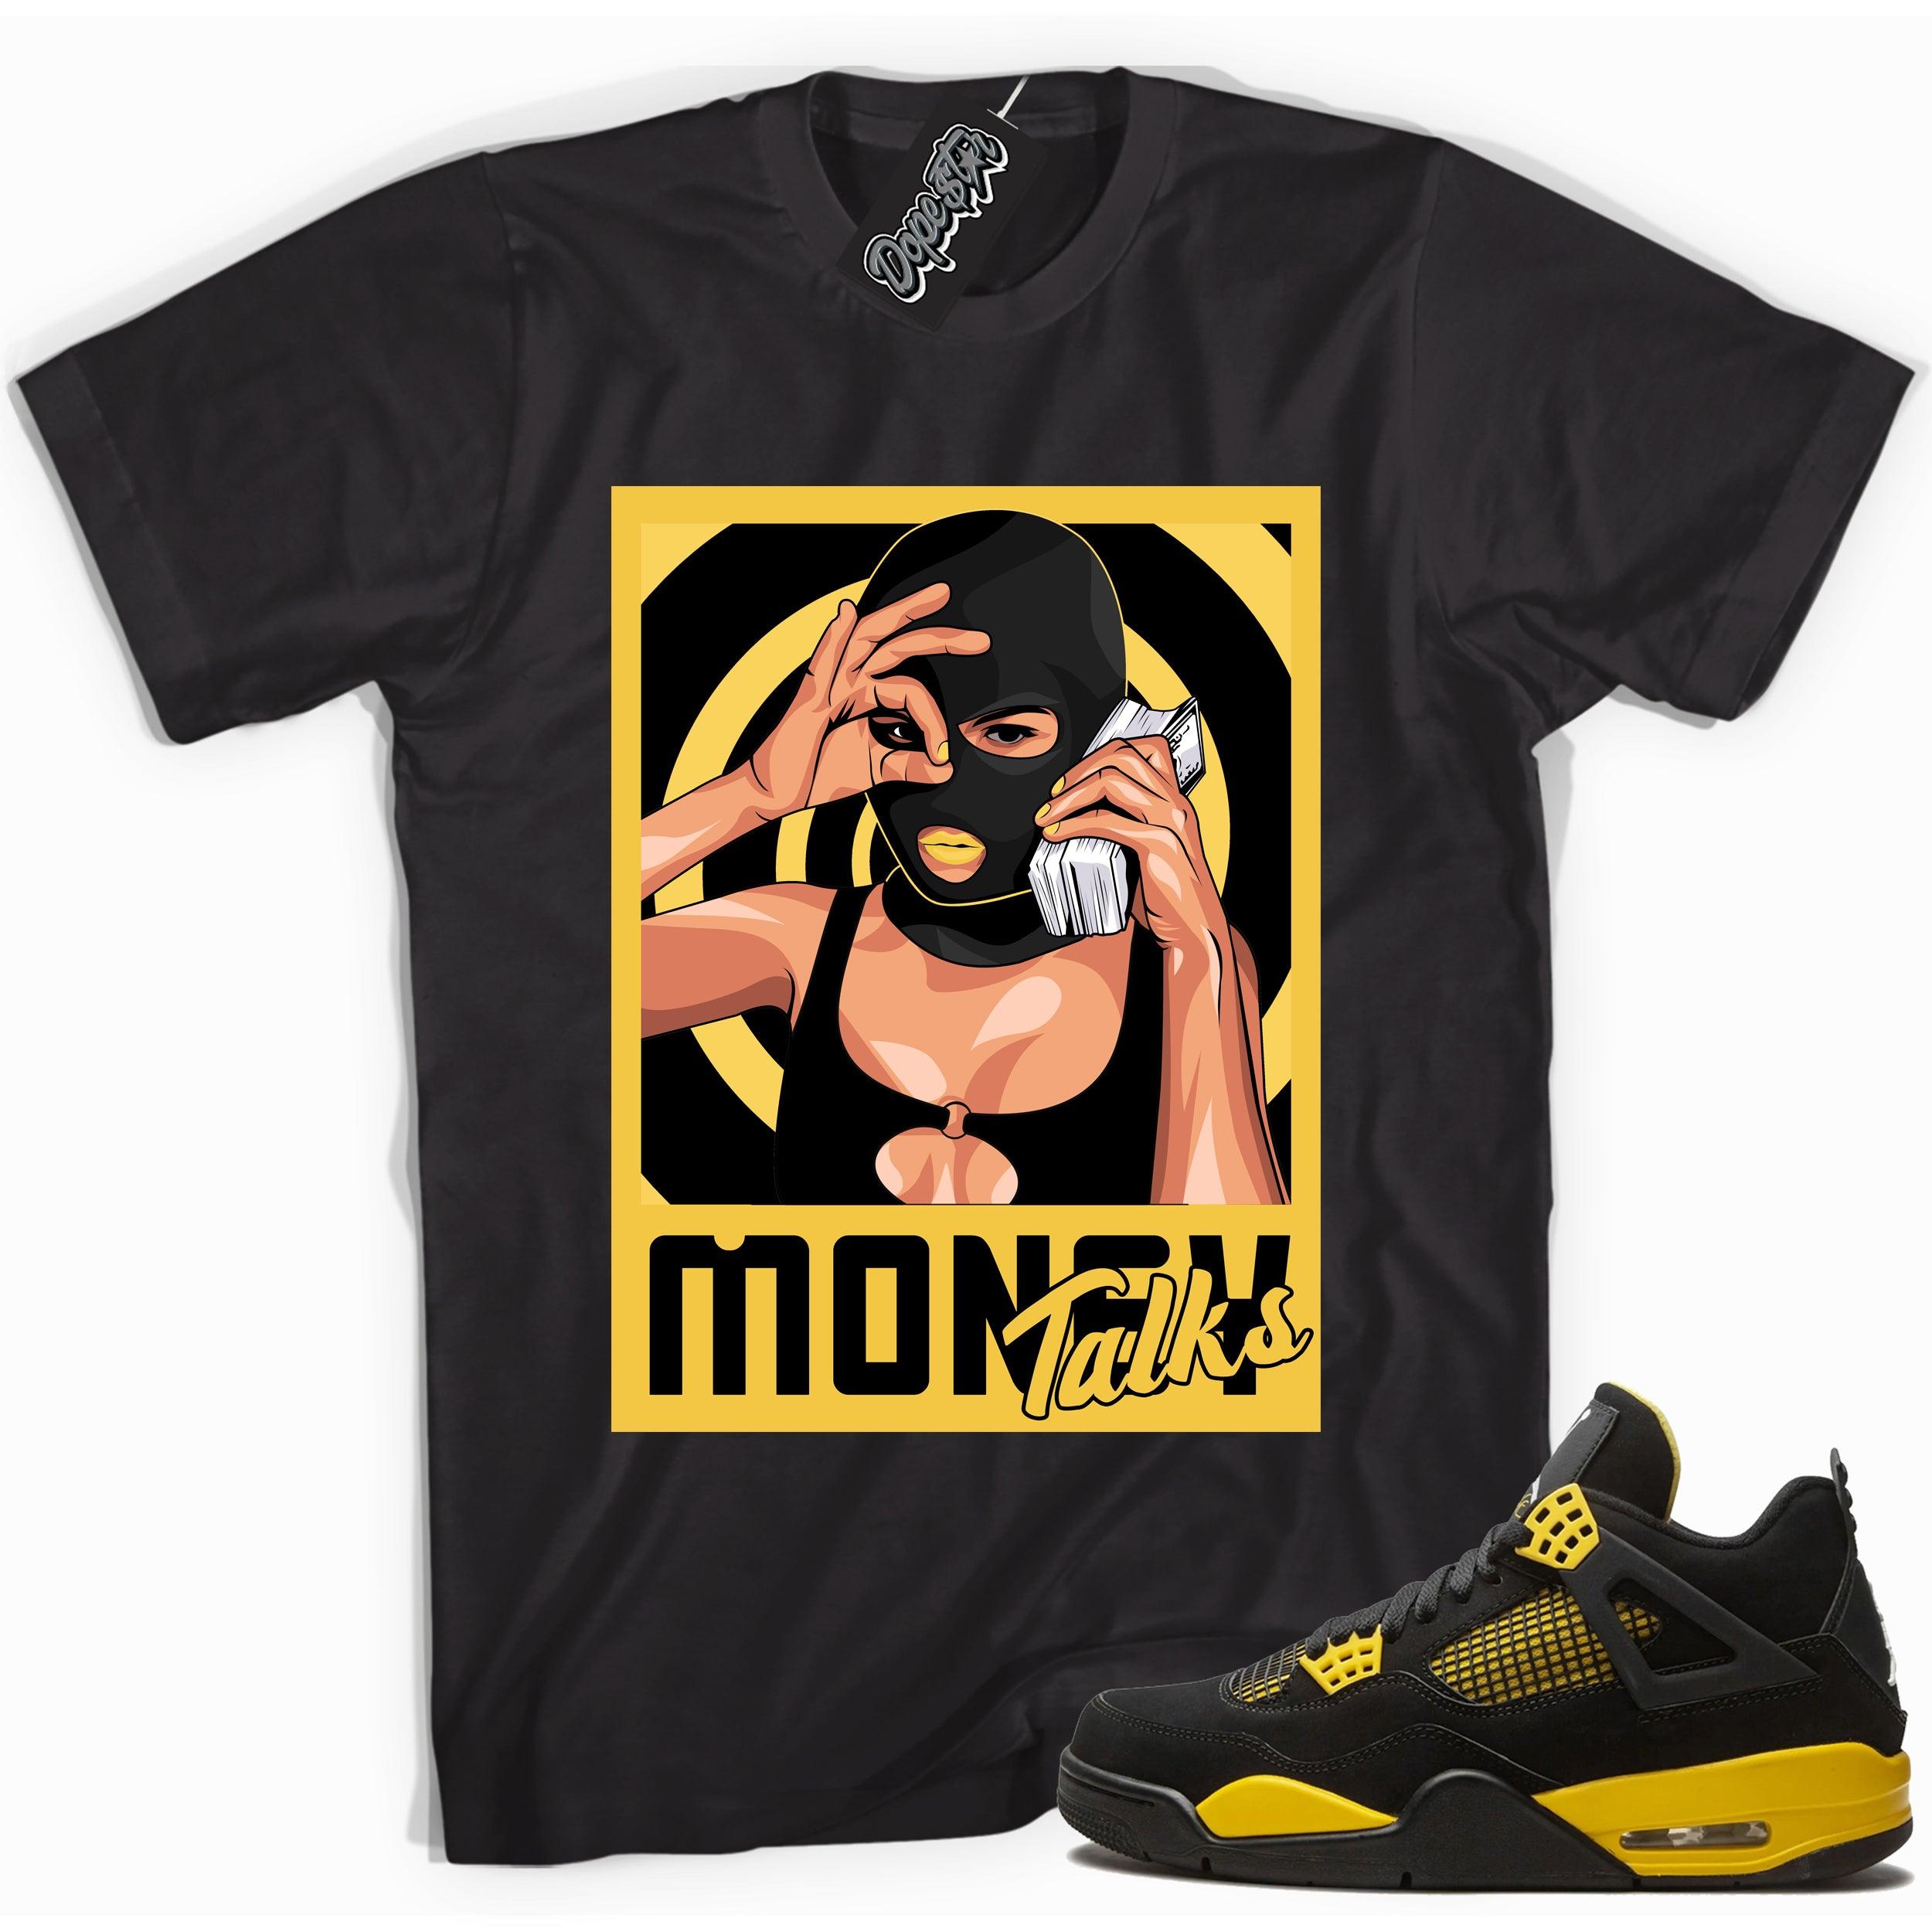 Cool black graphic tee with 'money talks' print, that perfectly matches  Air Jordan 4 Thunder sneakers